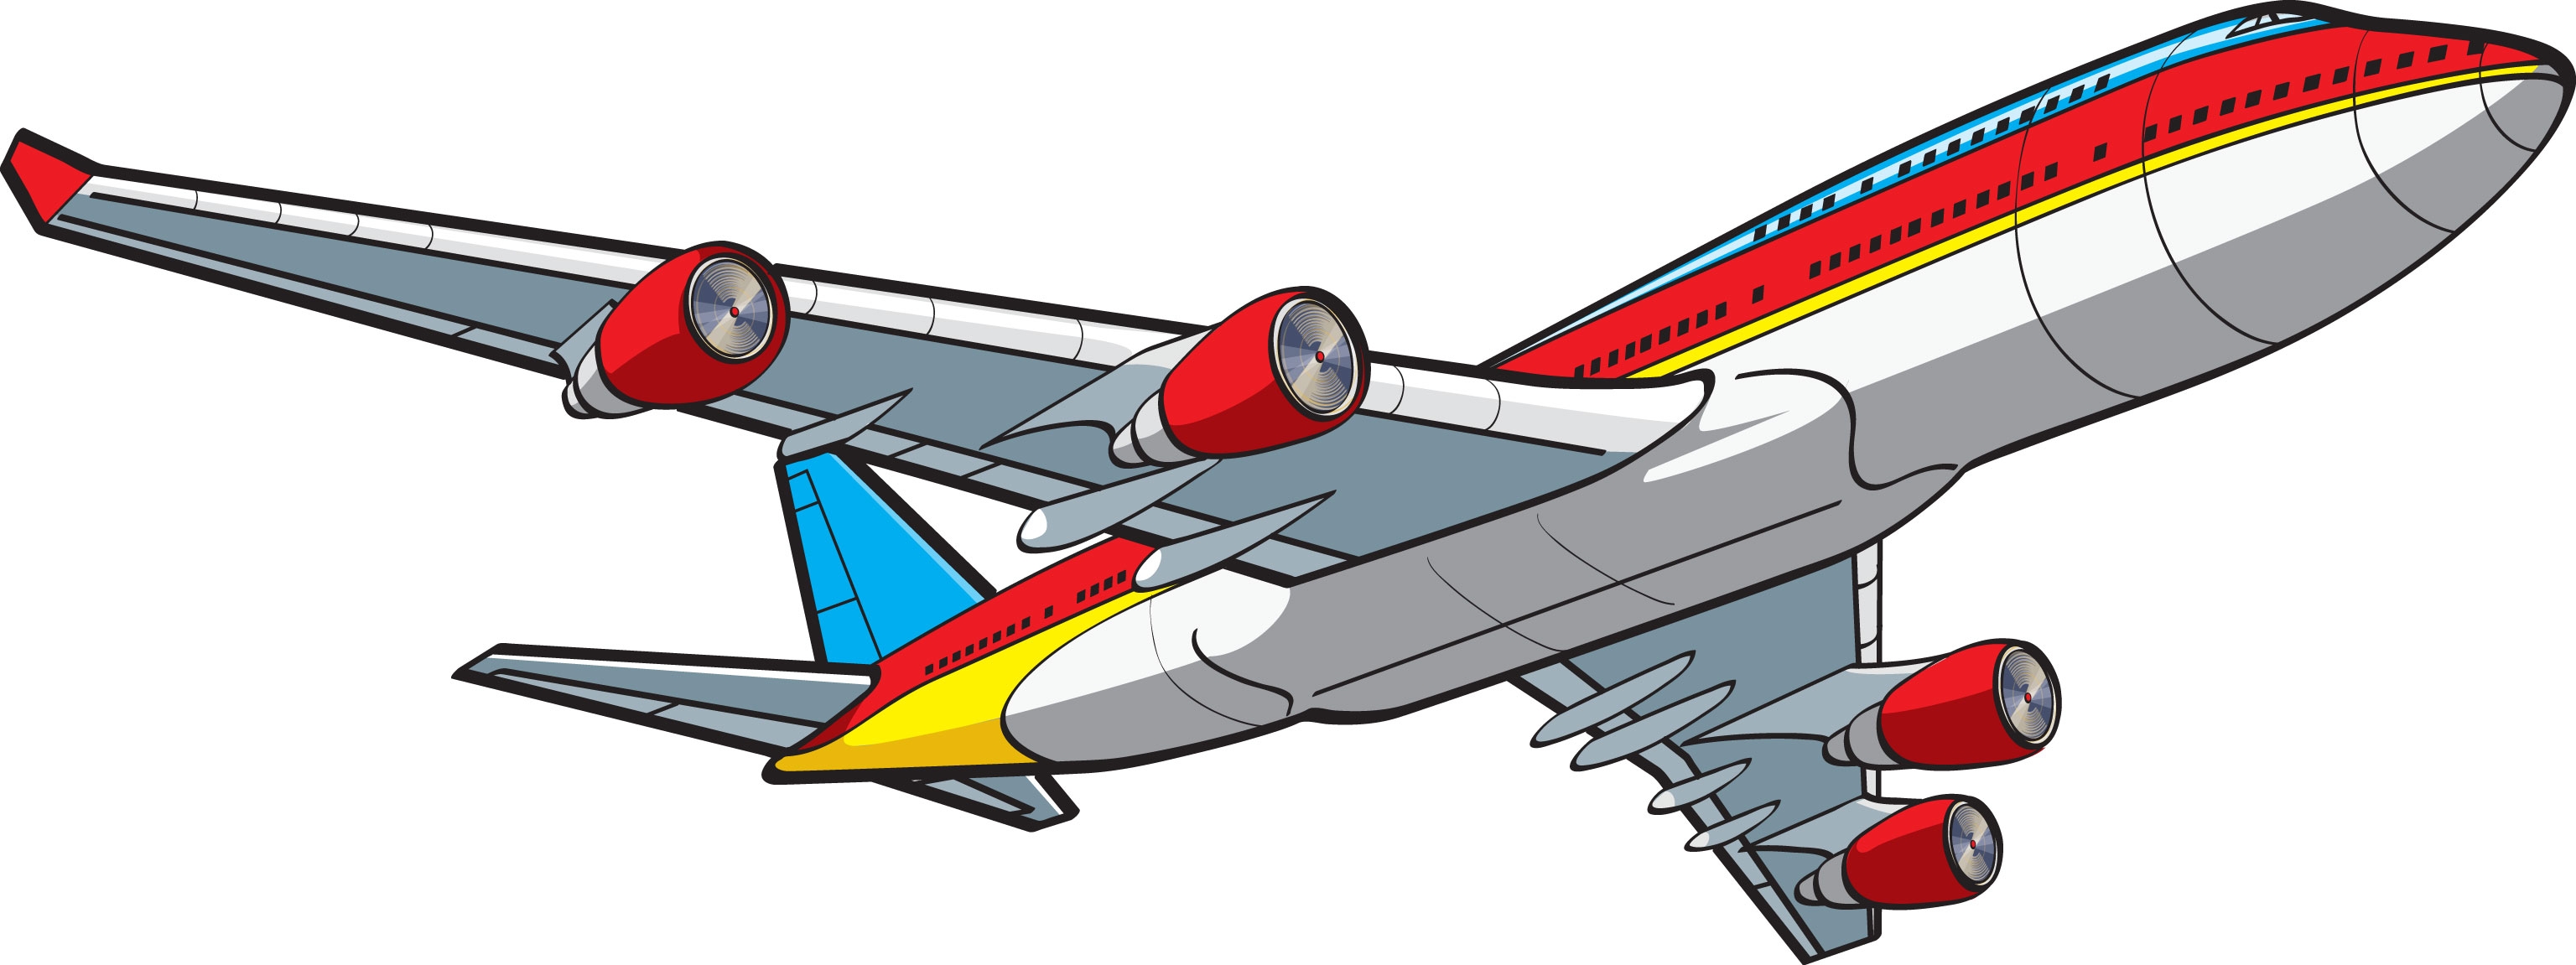 Jet airplane flying clipart